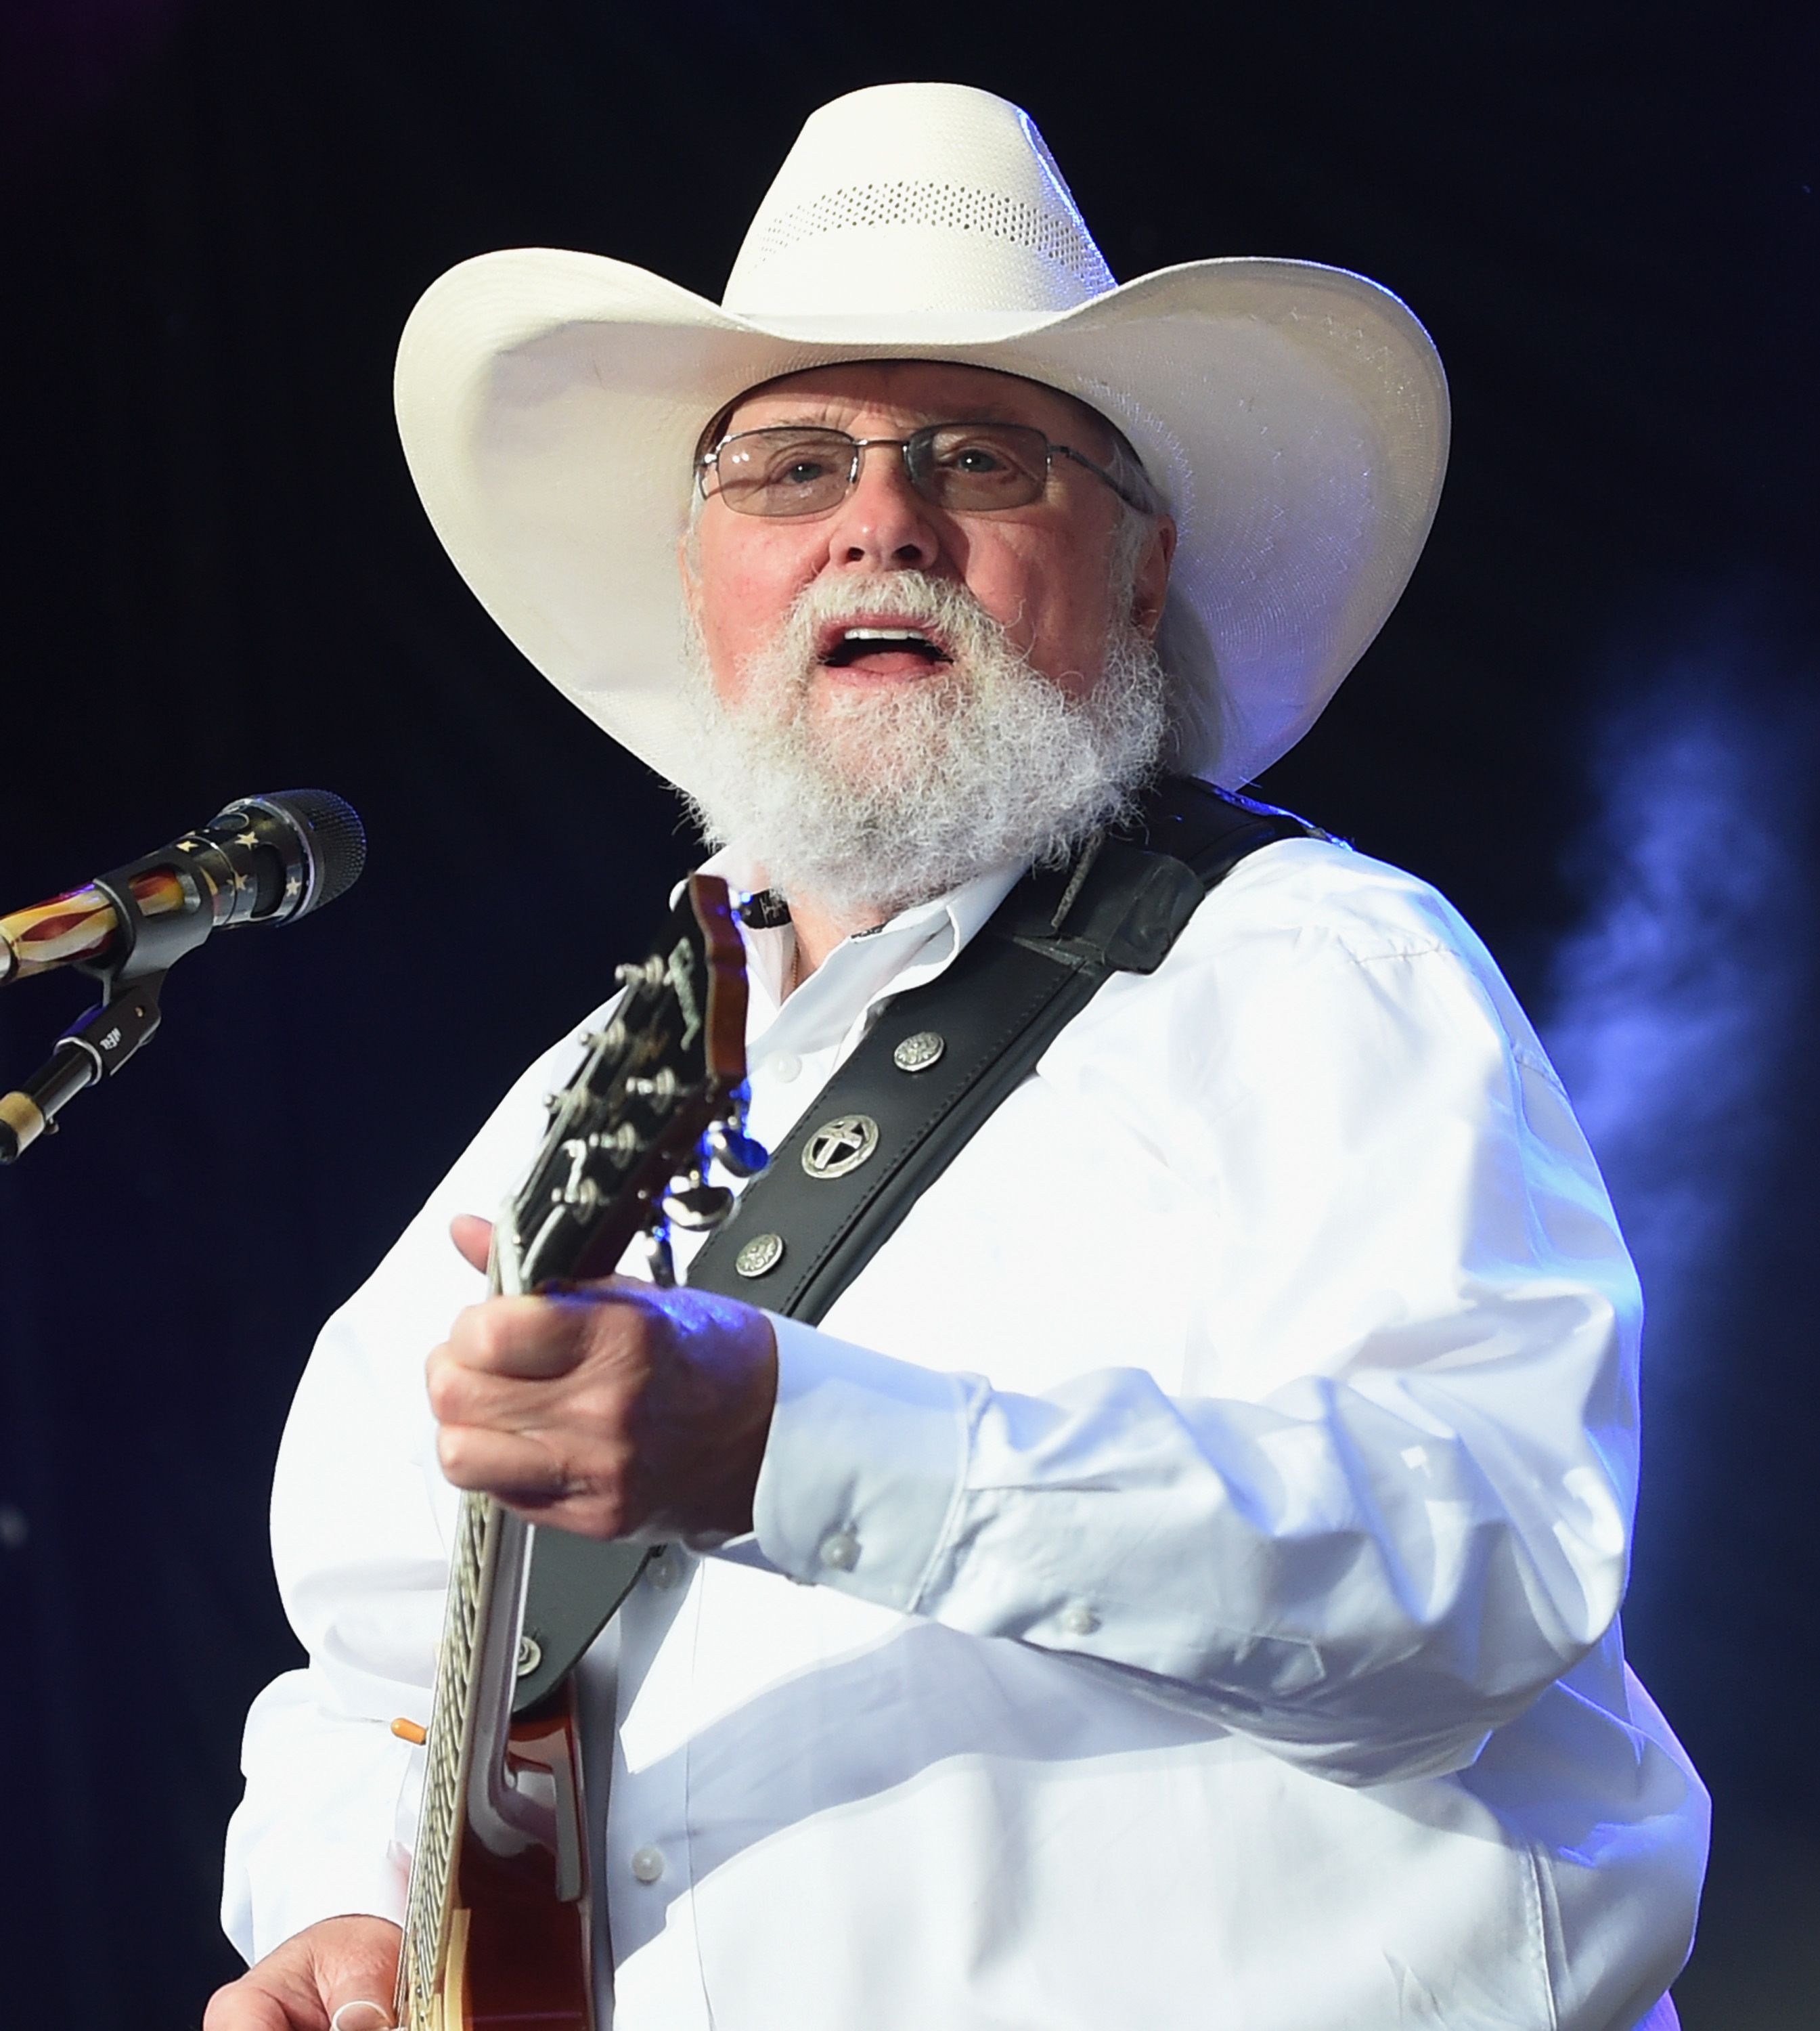 Charlie Daniels at the Kicker Country Stampede in 2018 | Source: Getty Images